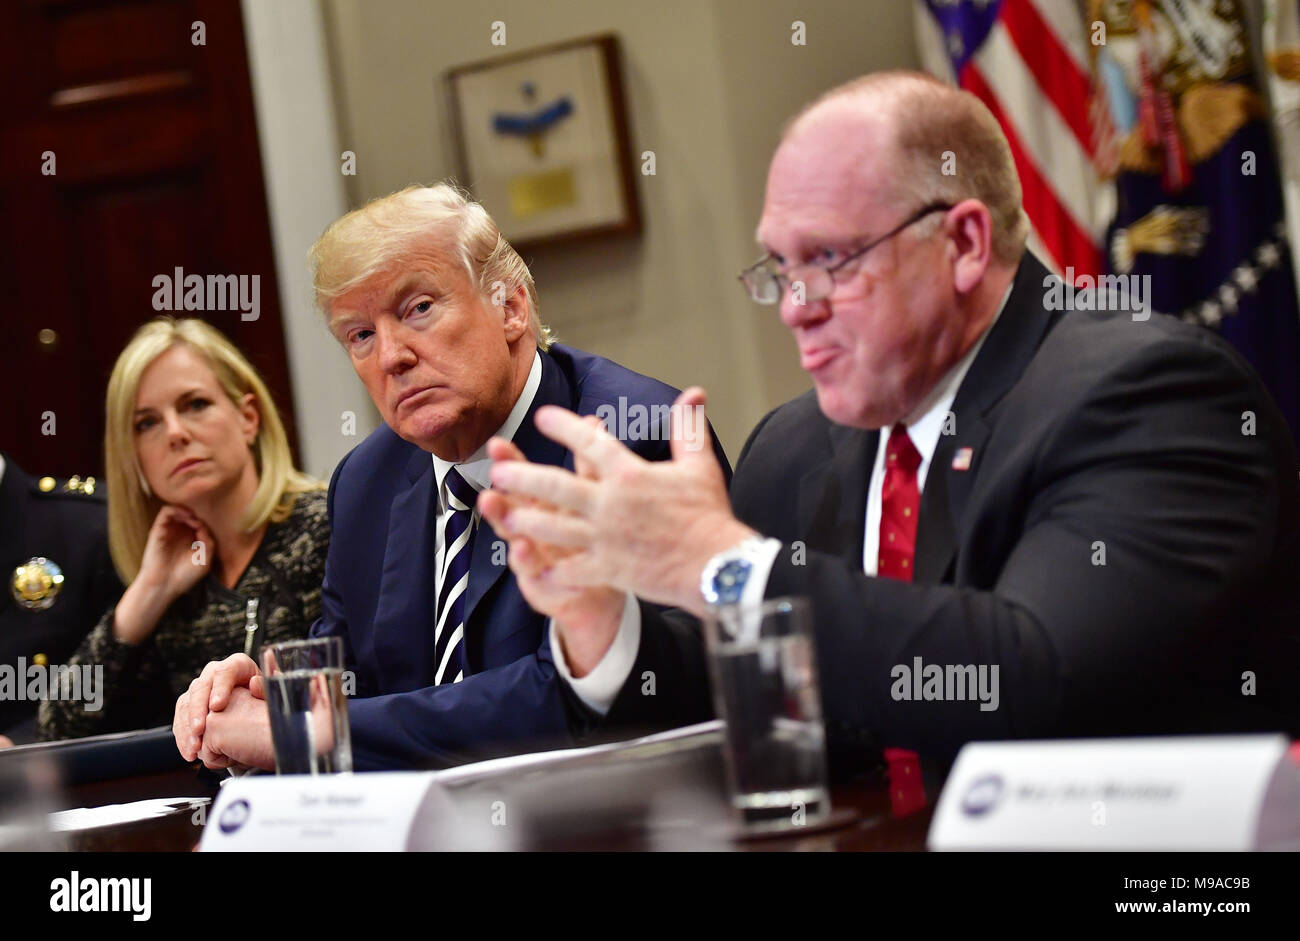 President Donald Trump (C) holds a law enforcement roundtable on sanctuary cities, in the Roosevelt Room at the White House on March 20, 2018 in Washington, DC Trump was joined by Homeland Security Secretary Kirstjen Nielsen (L) and Thomas Homan, acting director of Immigration and Customs Enforcement. Credit: Kevin Dietsch/Pool via CNP - NO WIRE SERVICE · Photo: Kevin Dietsch/Consolidated News Photos/Kevin Dietsch - Pool via CNP Stock Photo